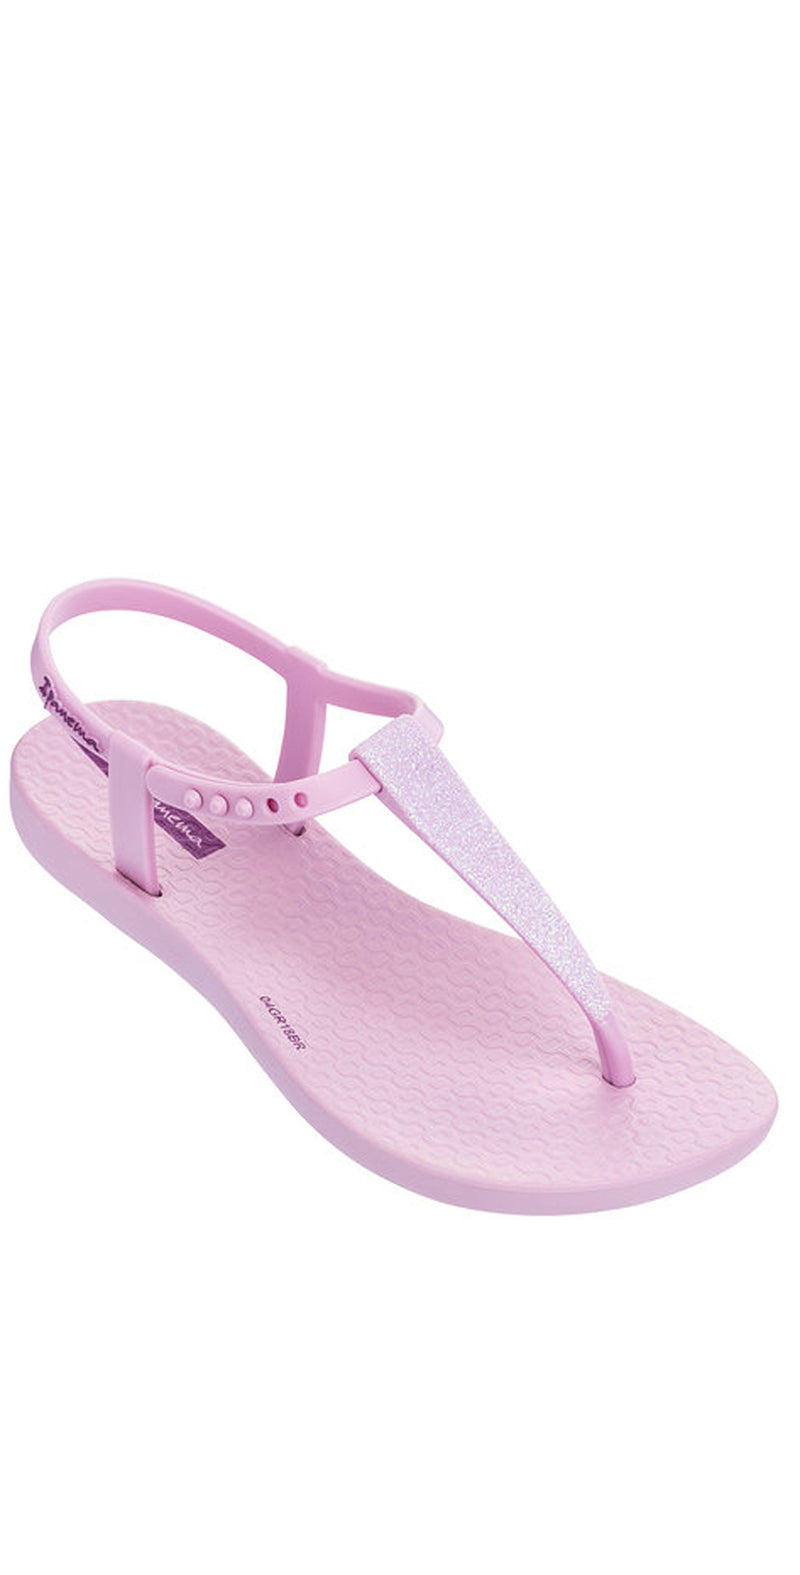 iPanema Shimmerkid T-Strap Sandal in Pink 22926-82306